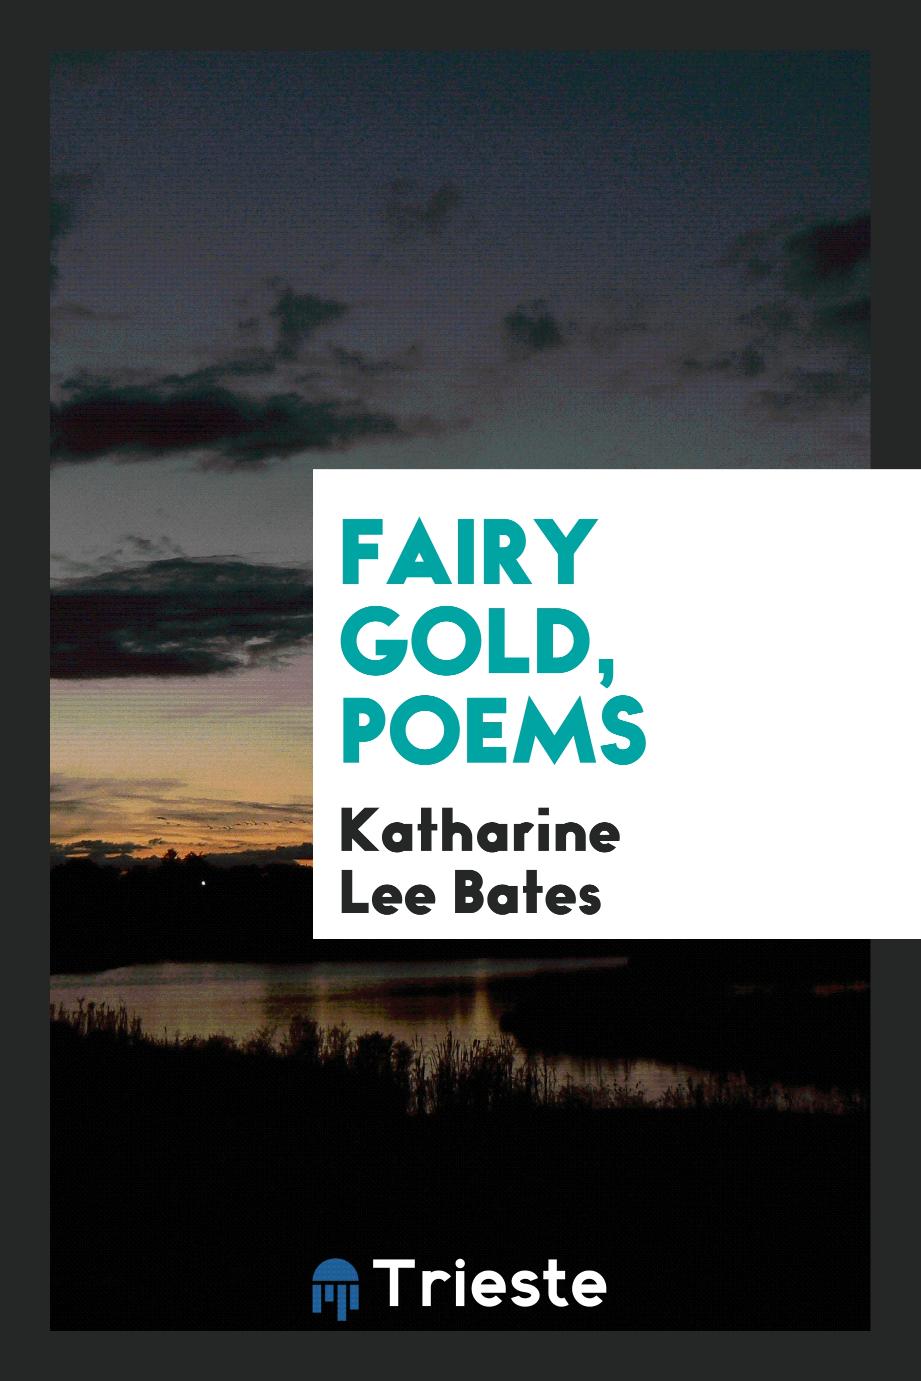 Fairy gold, poems